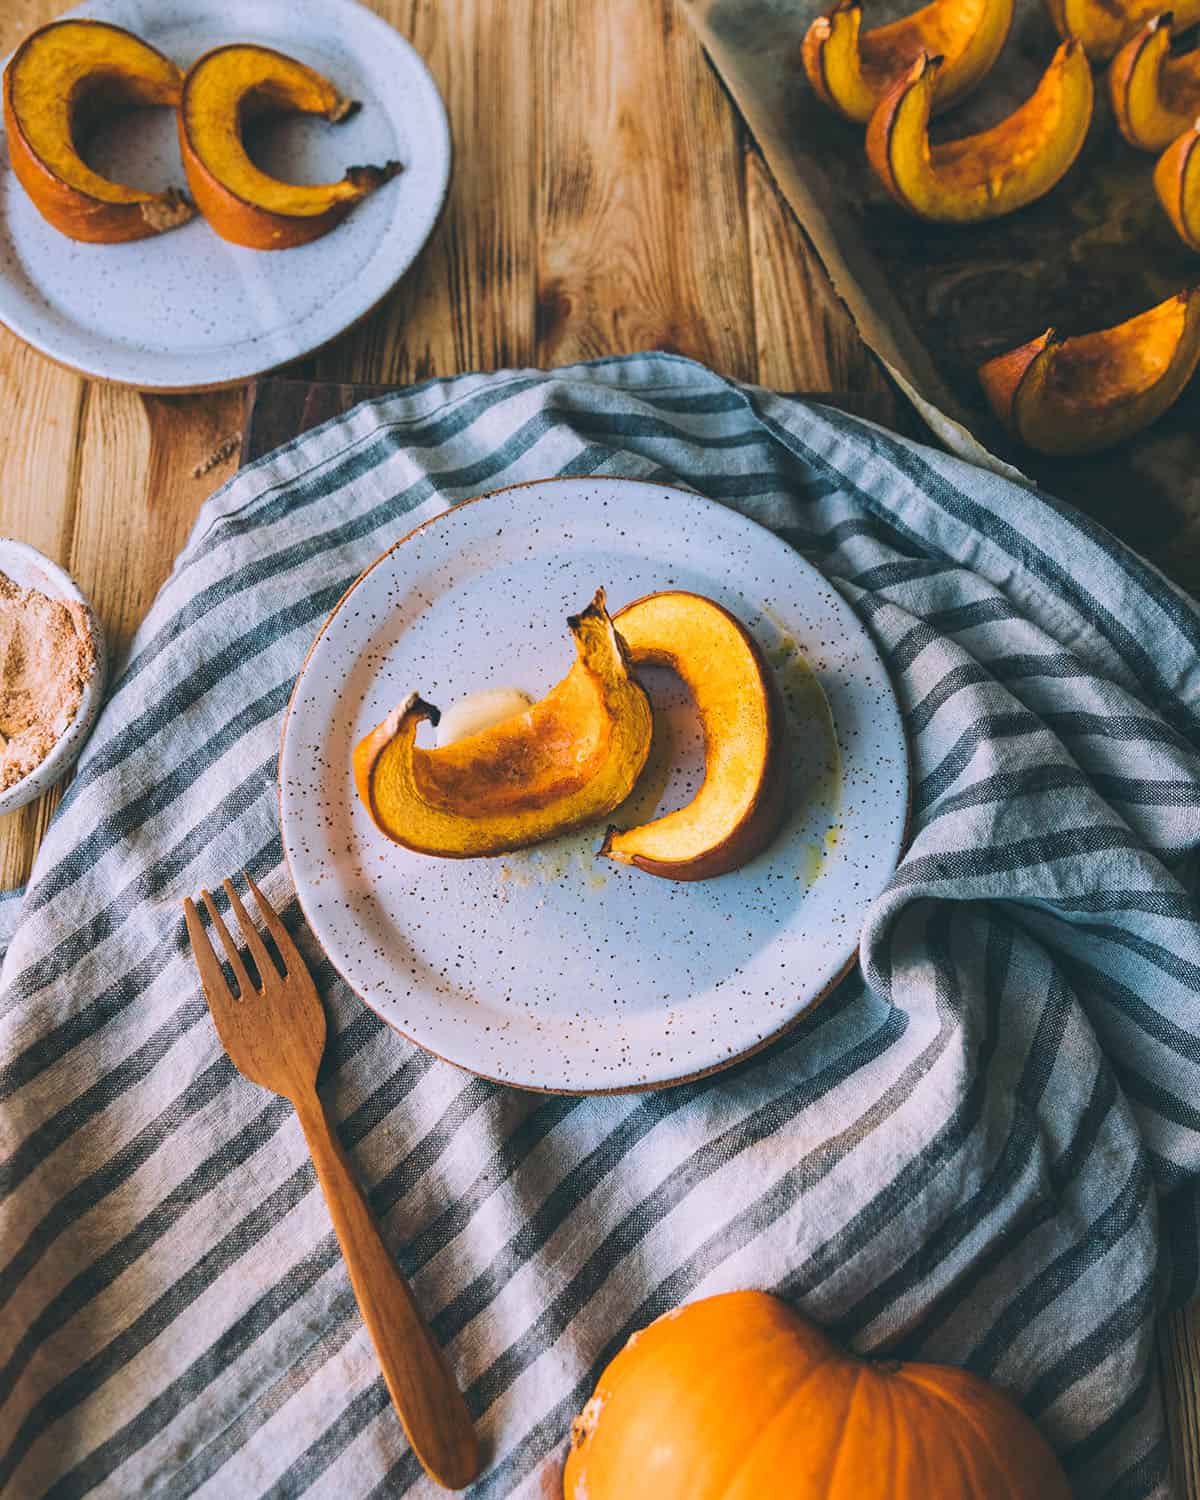 Roasted pumpkin wedges on a white plate resting on a gray and white striped towel, surrounded by other plates with pumpkin wedges, a gold fork, and ingredients.